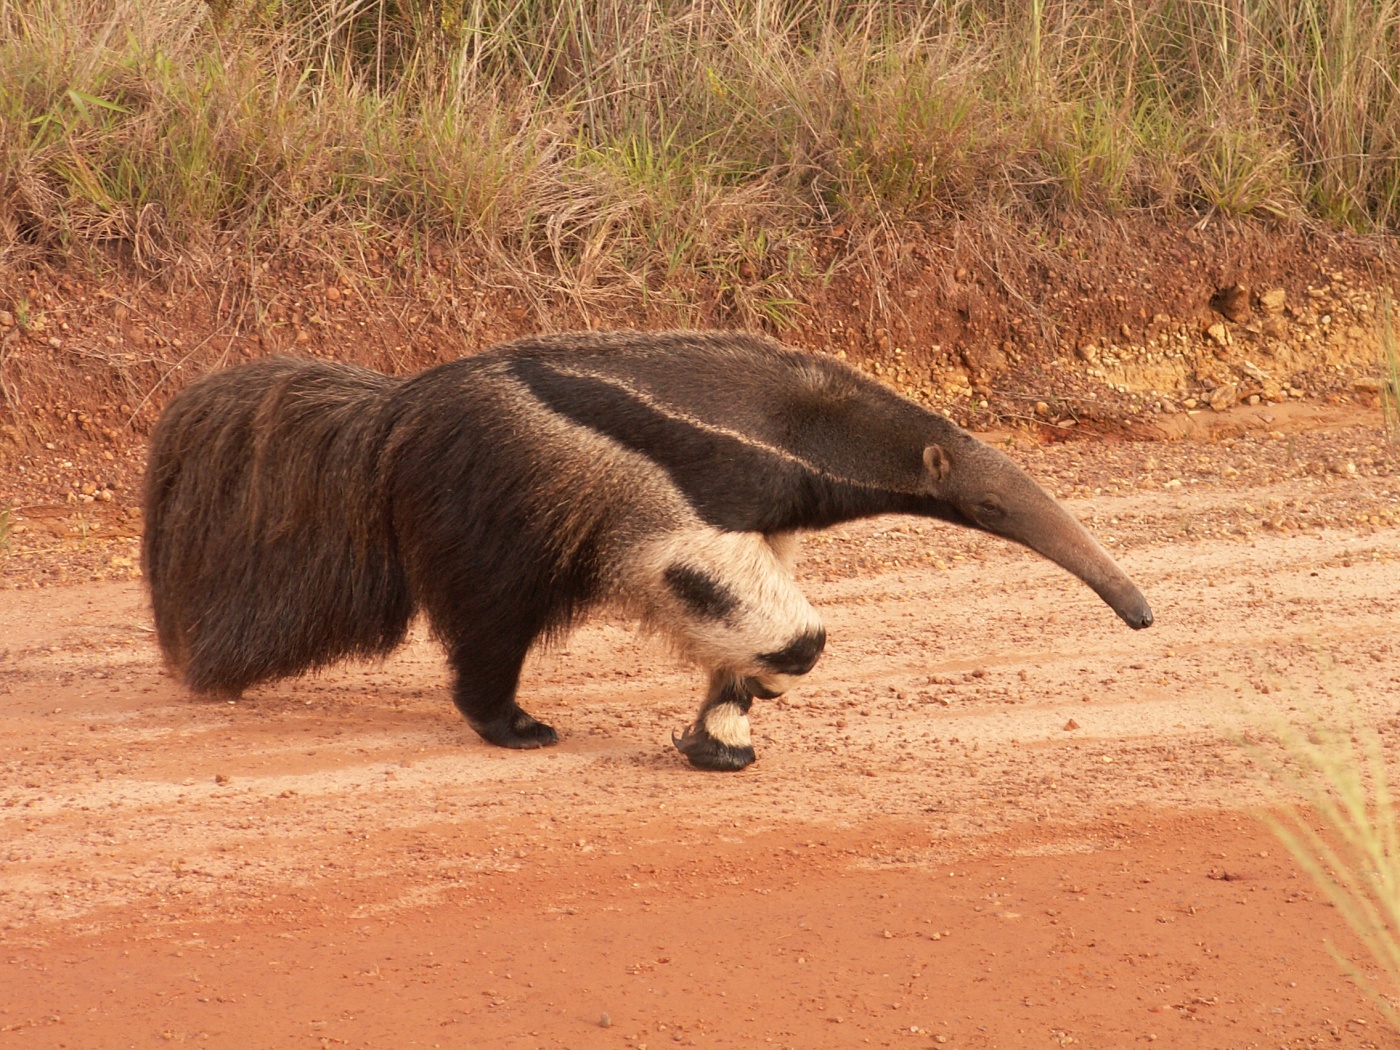 Anteater: Spirit Animal, Totem, Symbolism and Meaning - What Dream Means